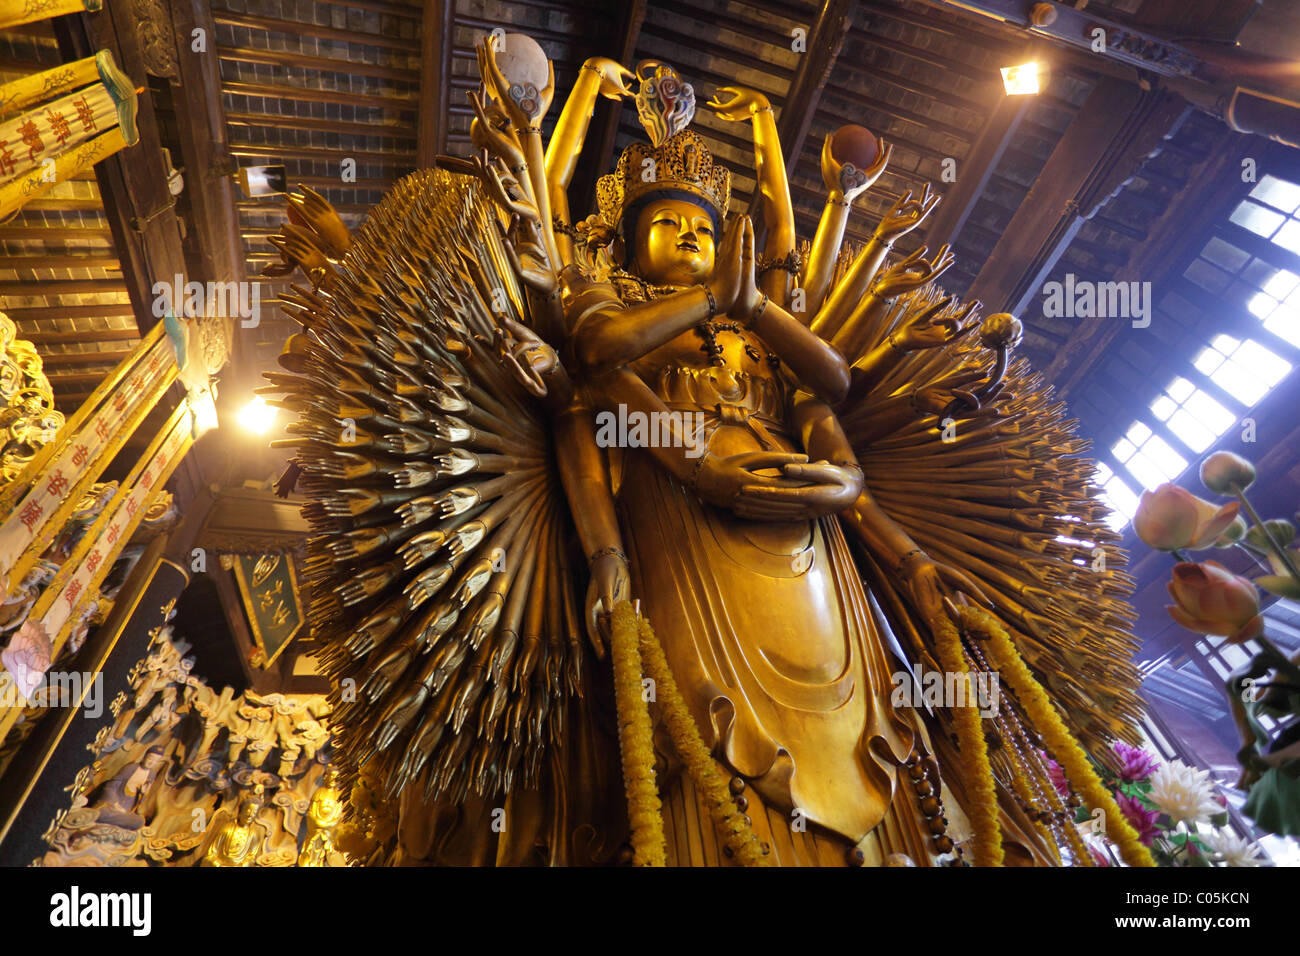 Thousand arms god statue in Longhua temple, Shanghai China Stock Photo